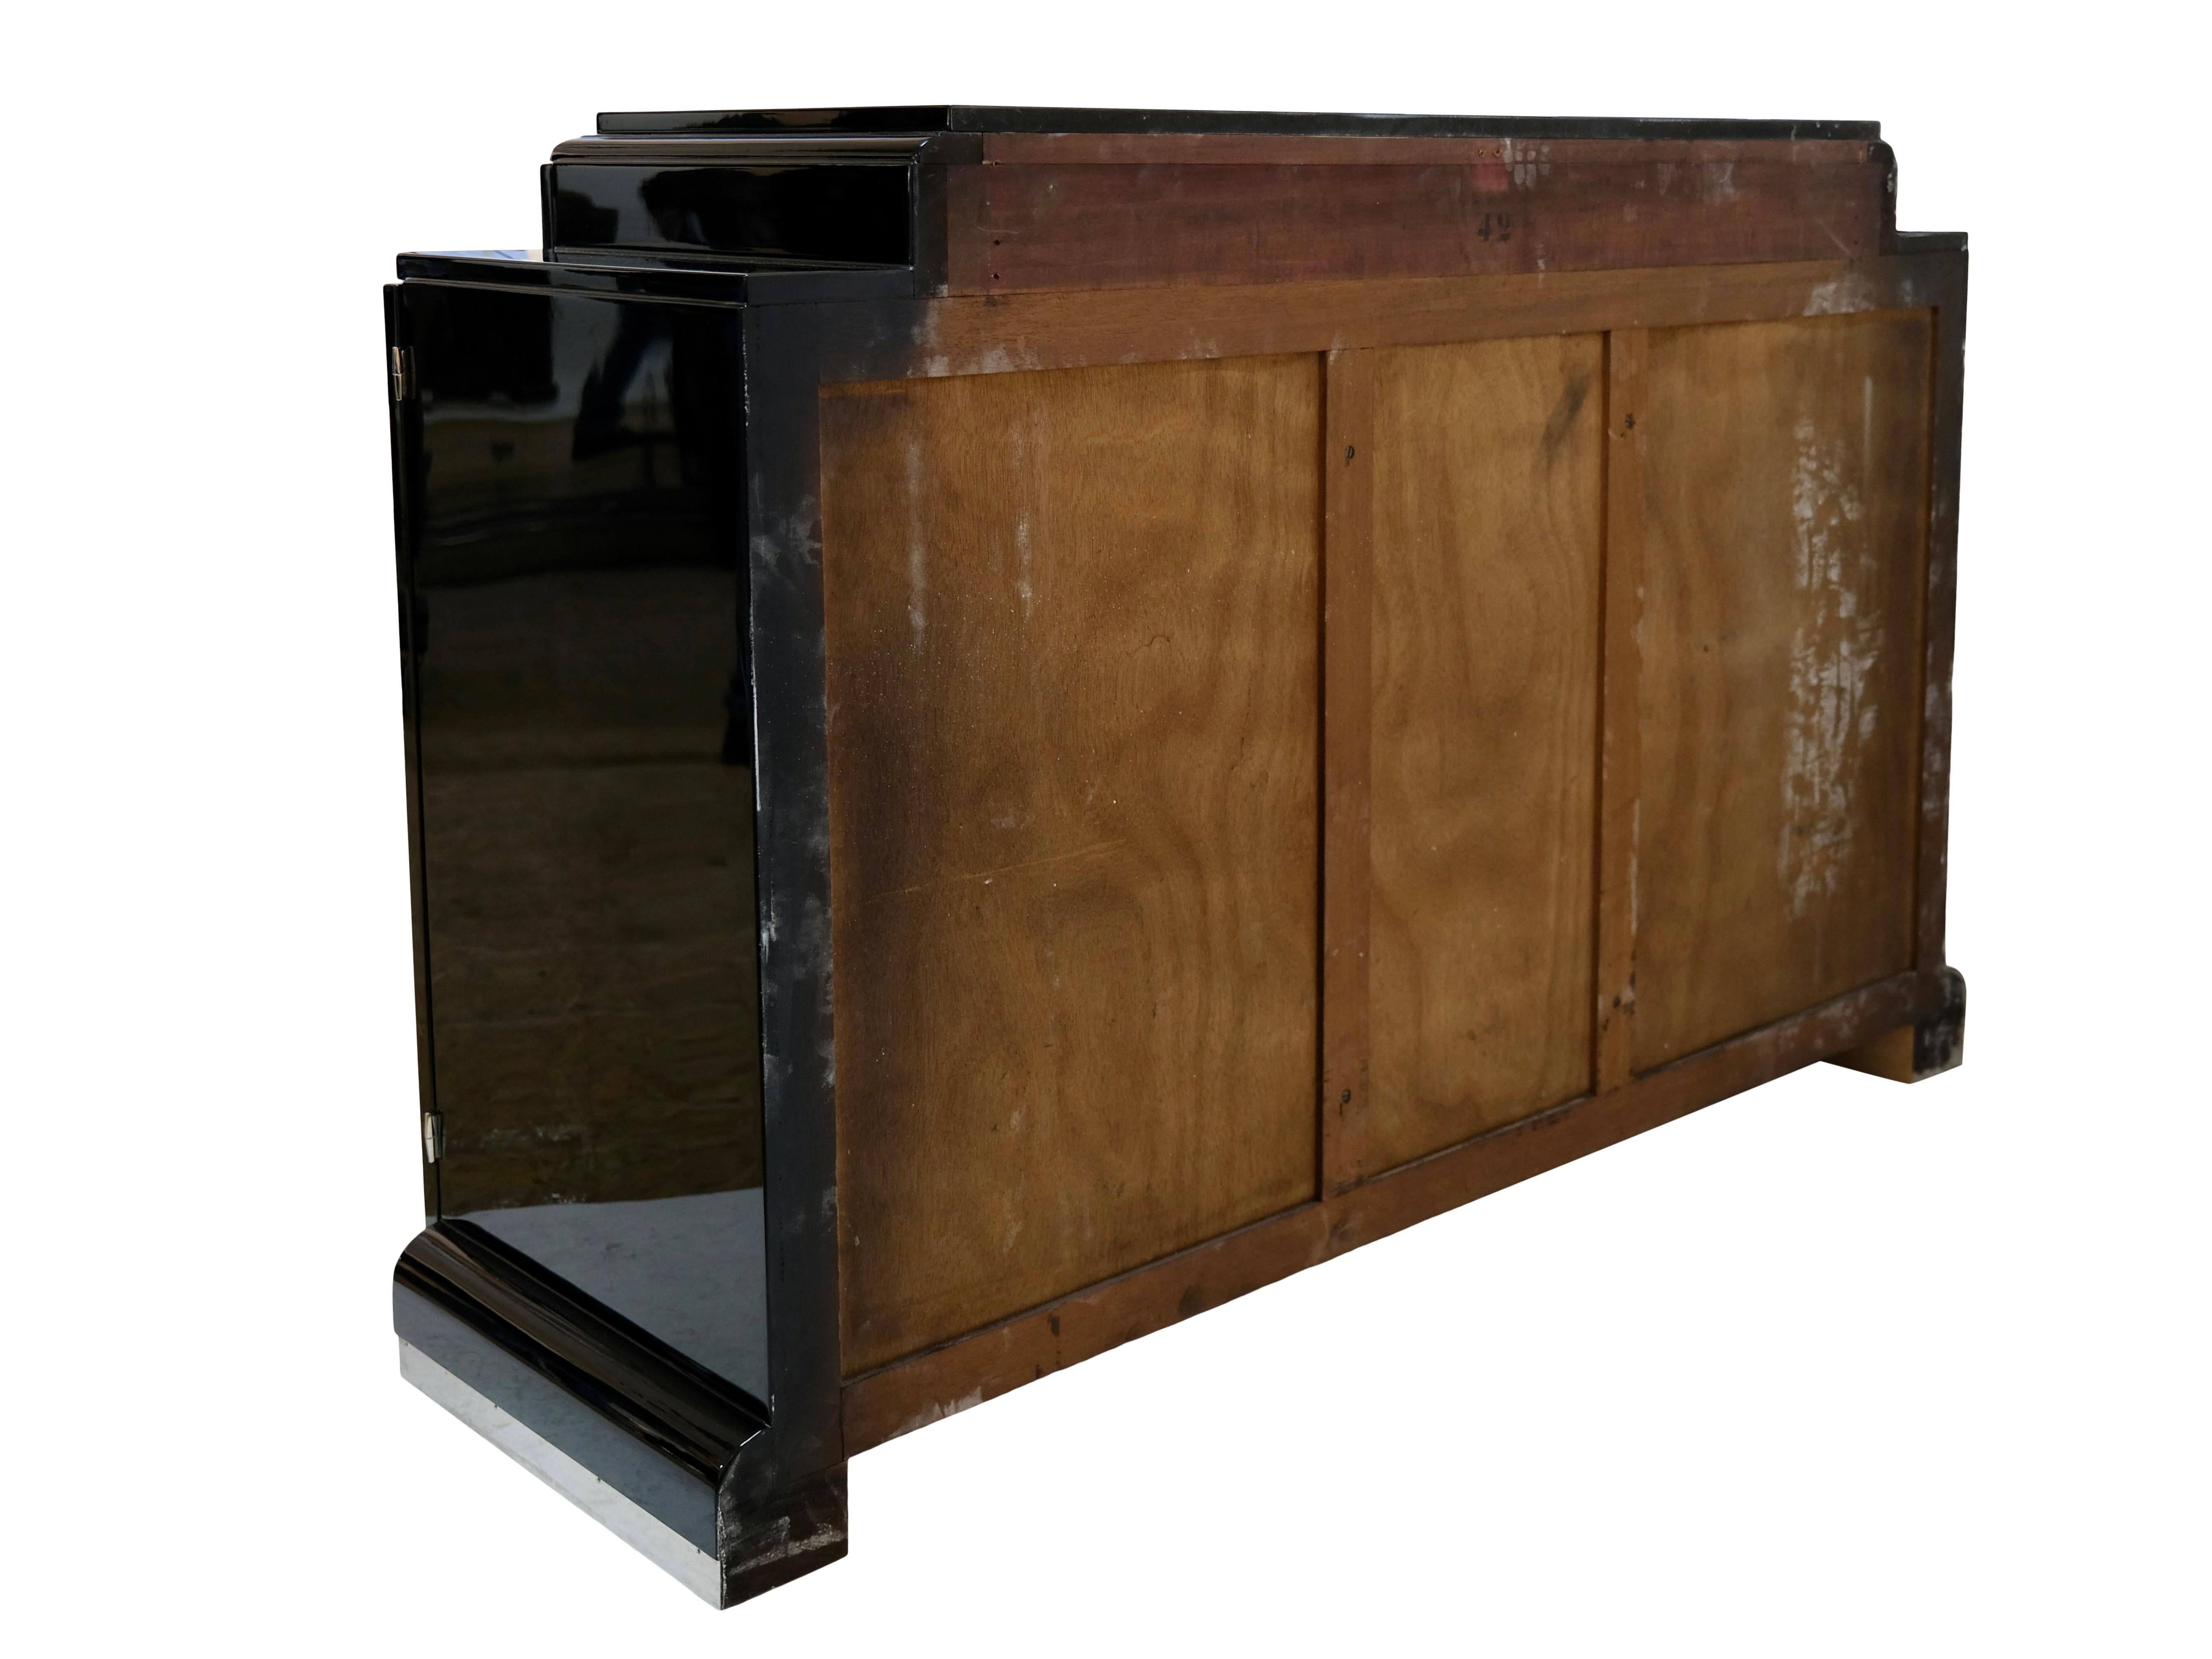 French 1930s Art Deco Two Doored Sideboard with Display Cabinet and Drawers For Sale 4